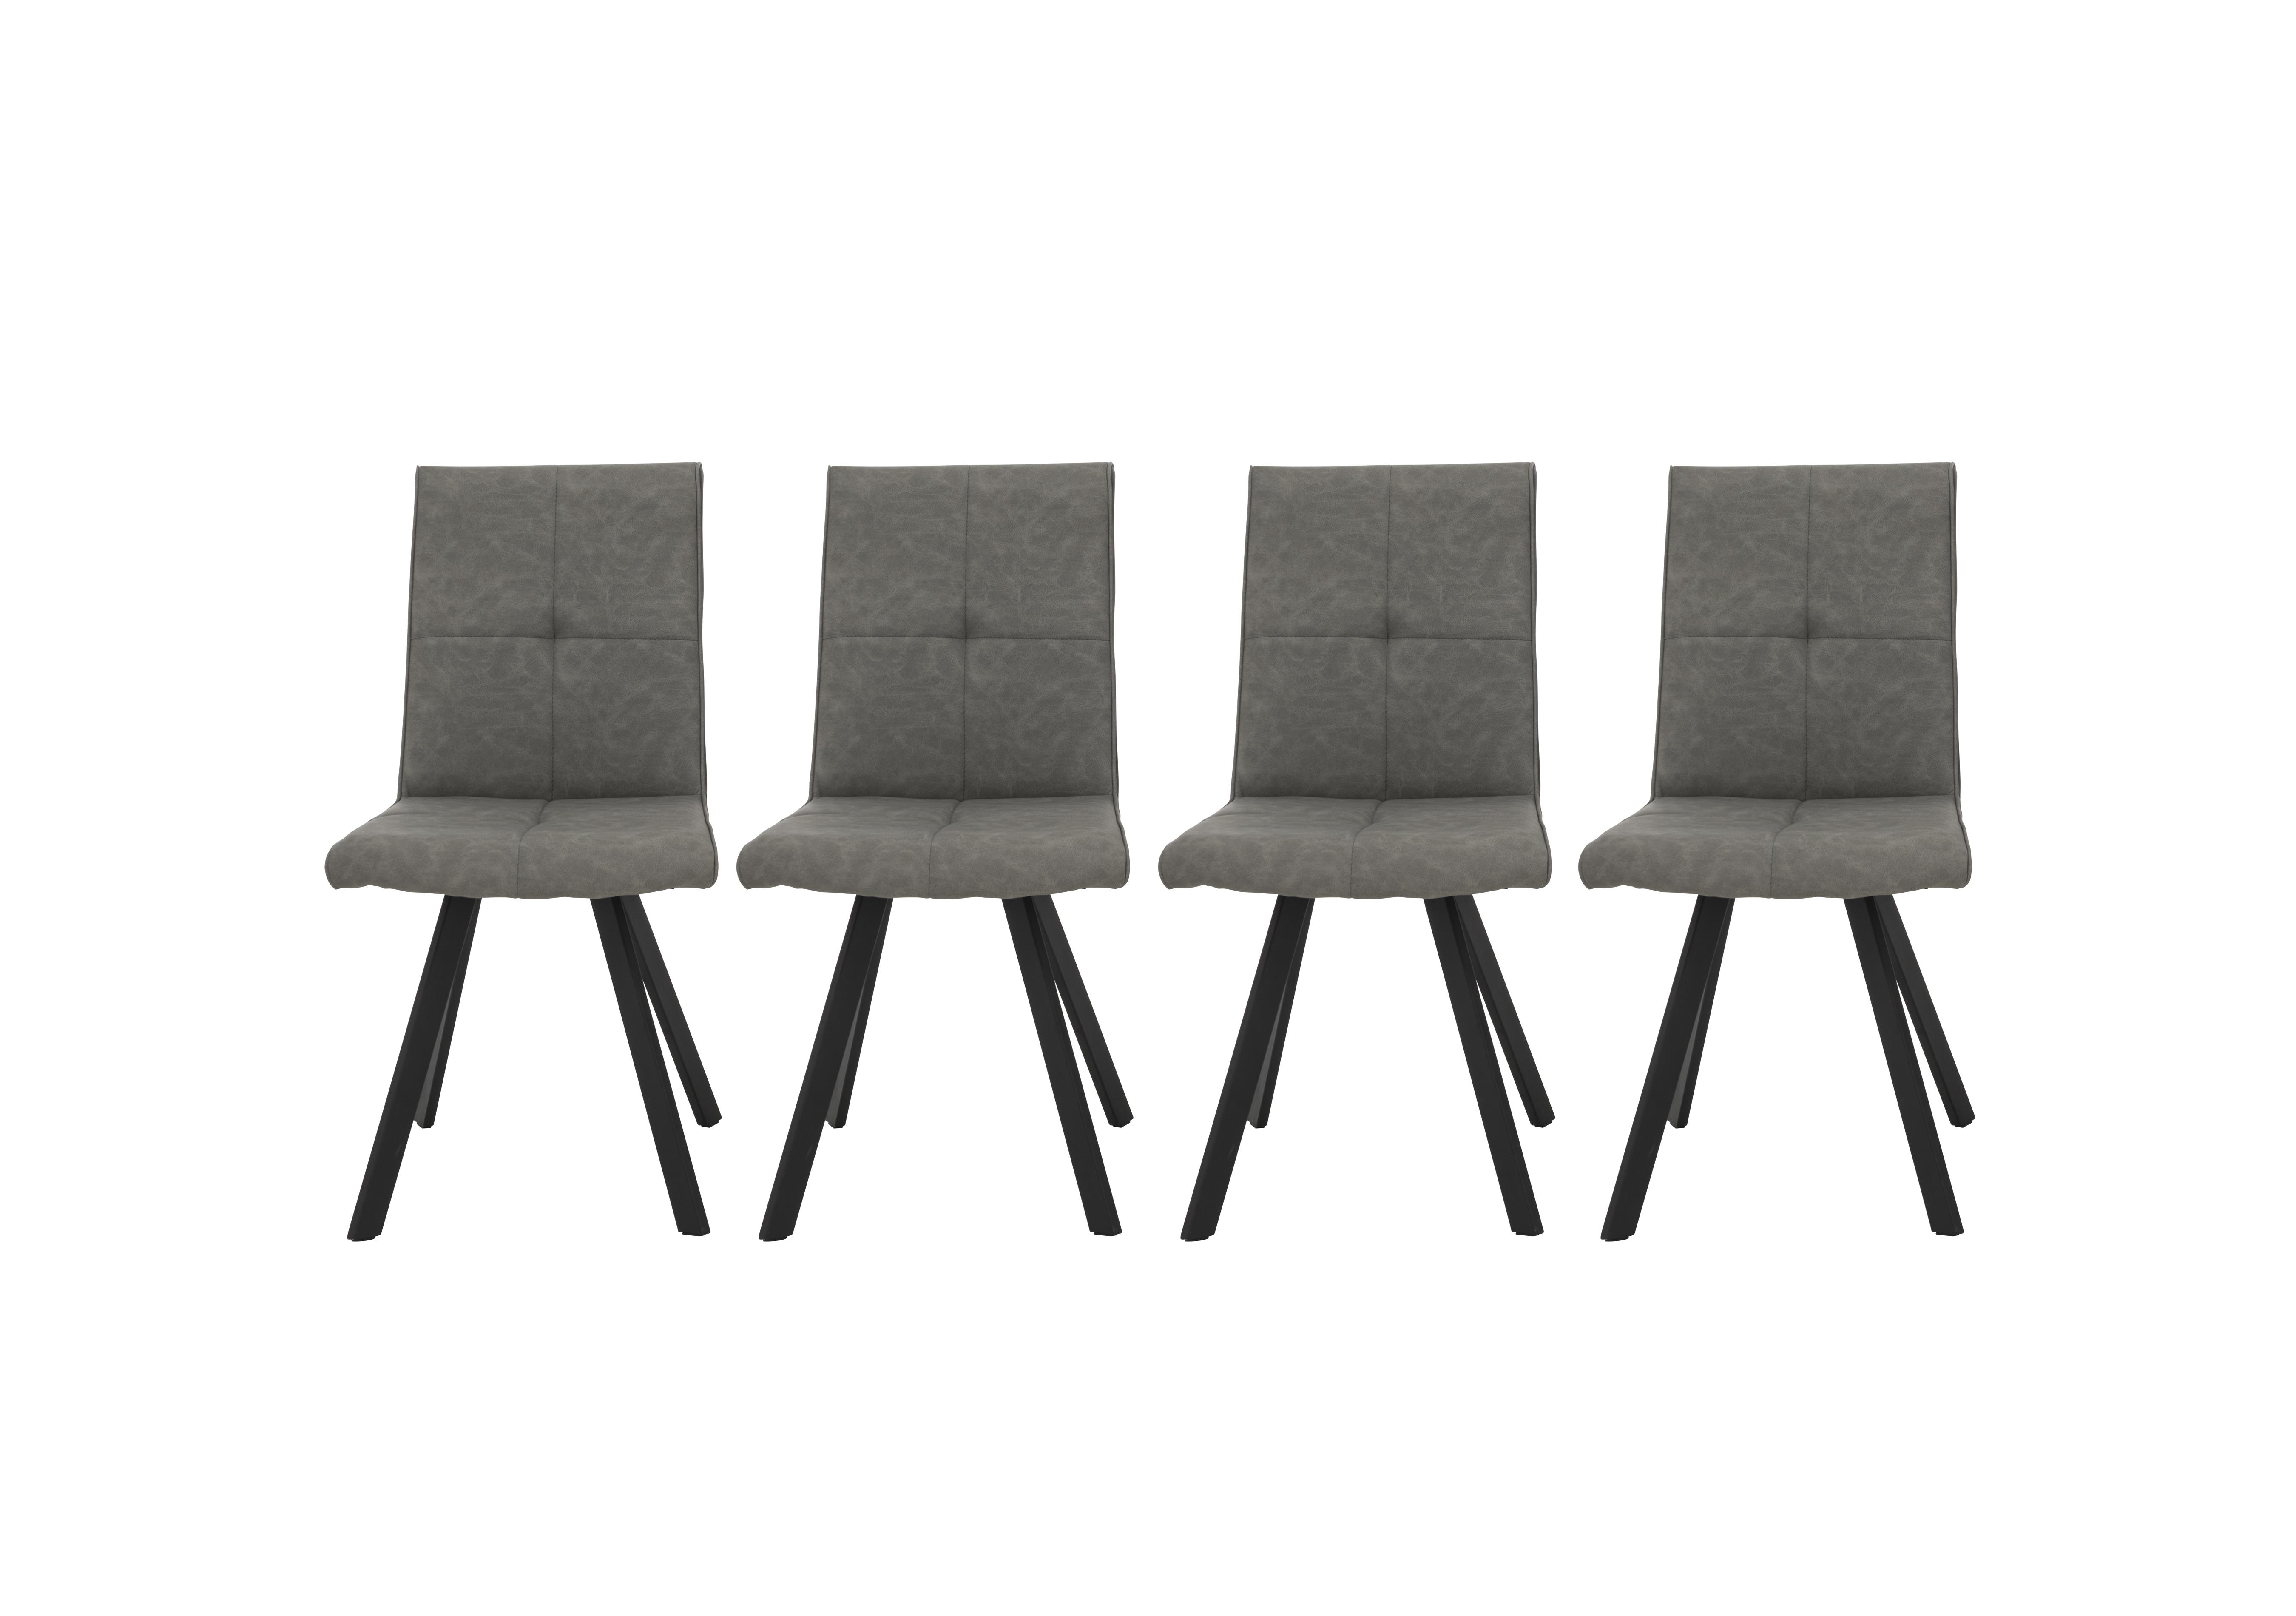 Phoenix Set of 4 Dining Chairs in Two Tone on Furniture Village